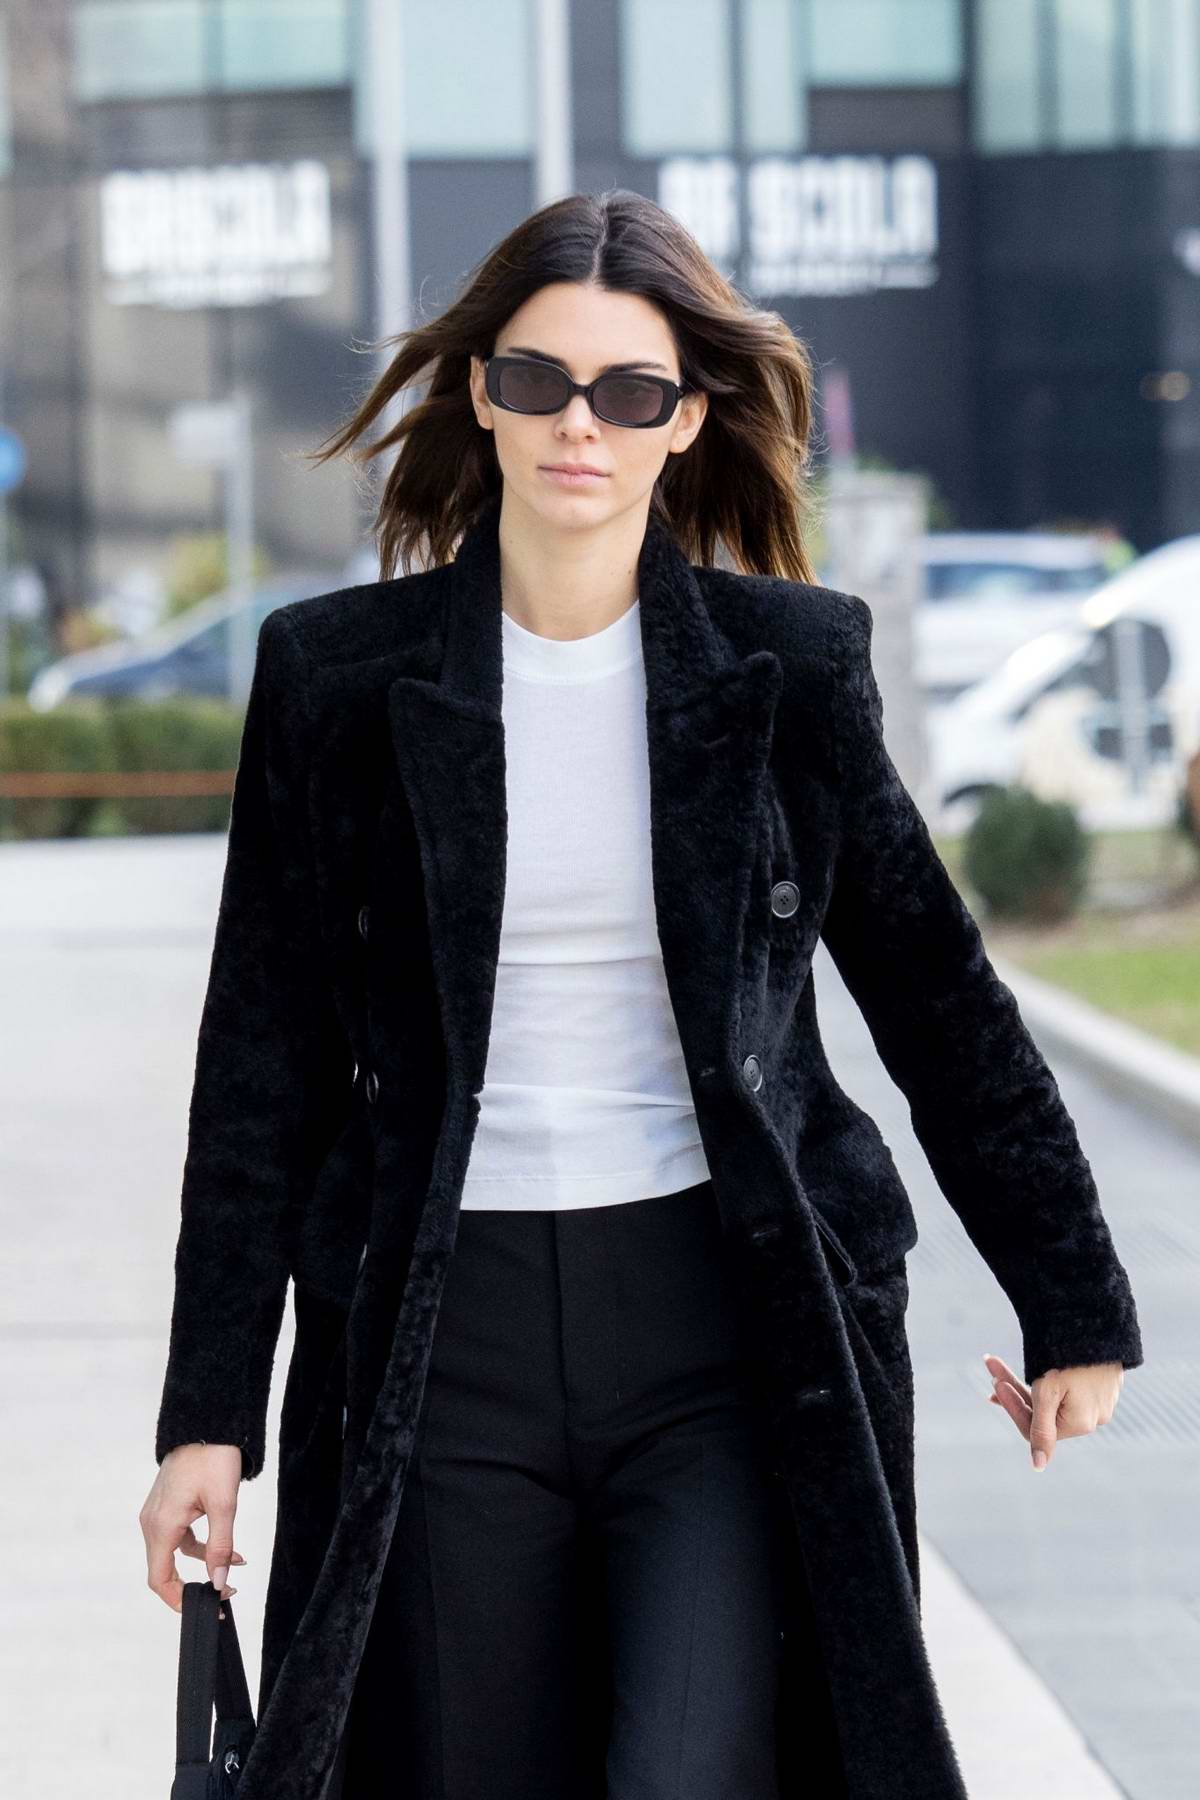 kendall jenner looks chic as she steps out during milan fashion week ...